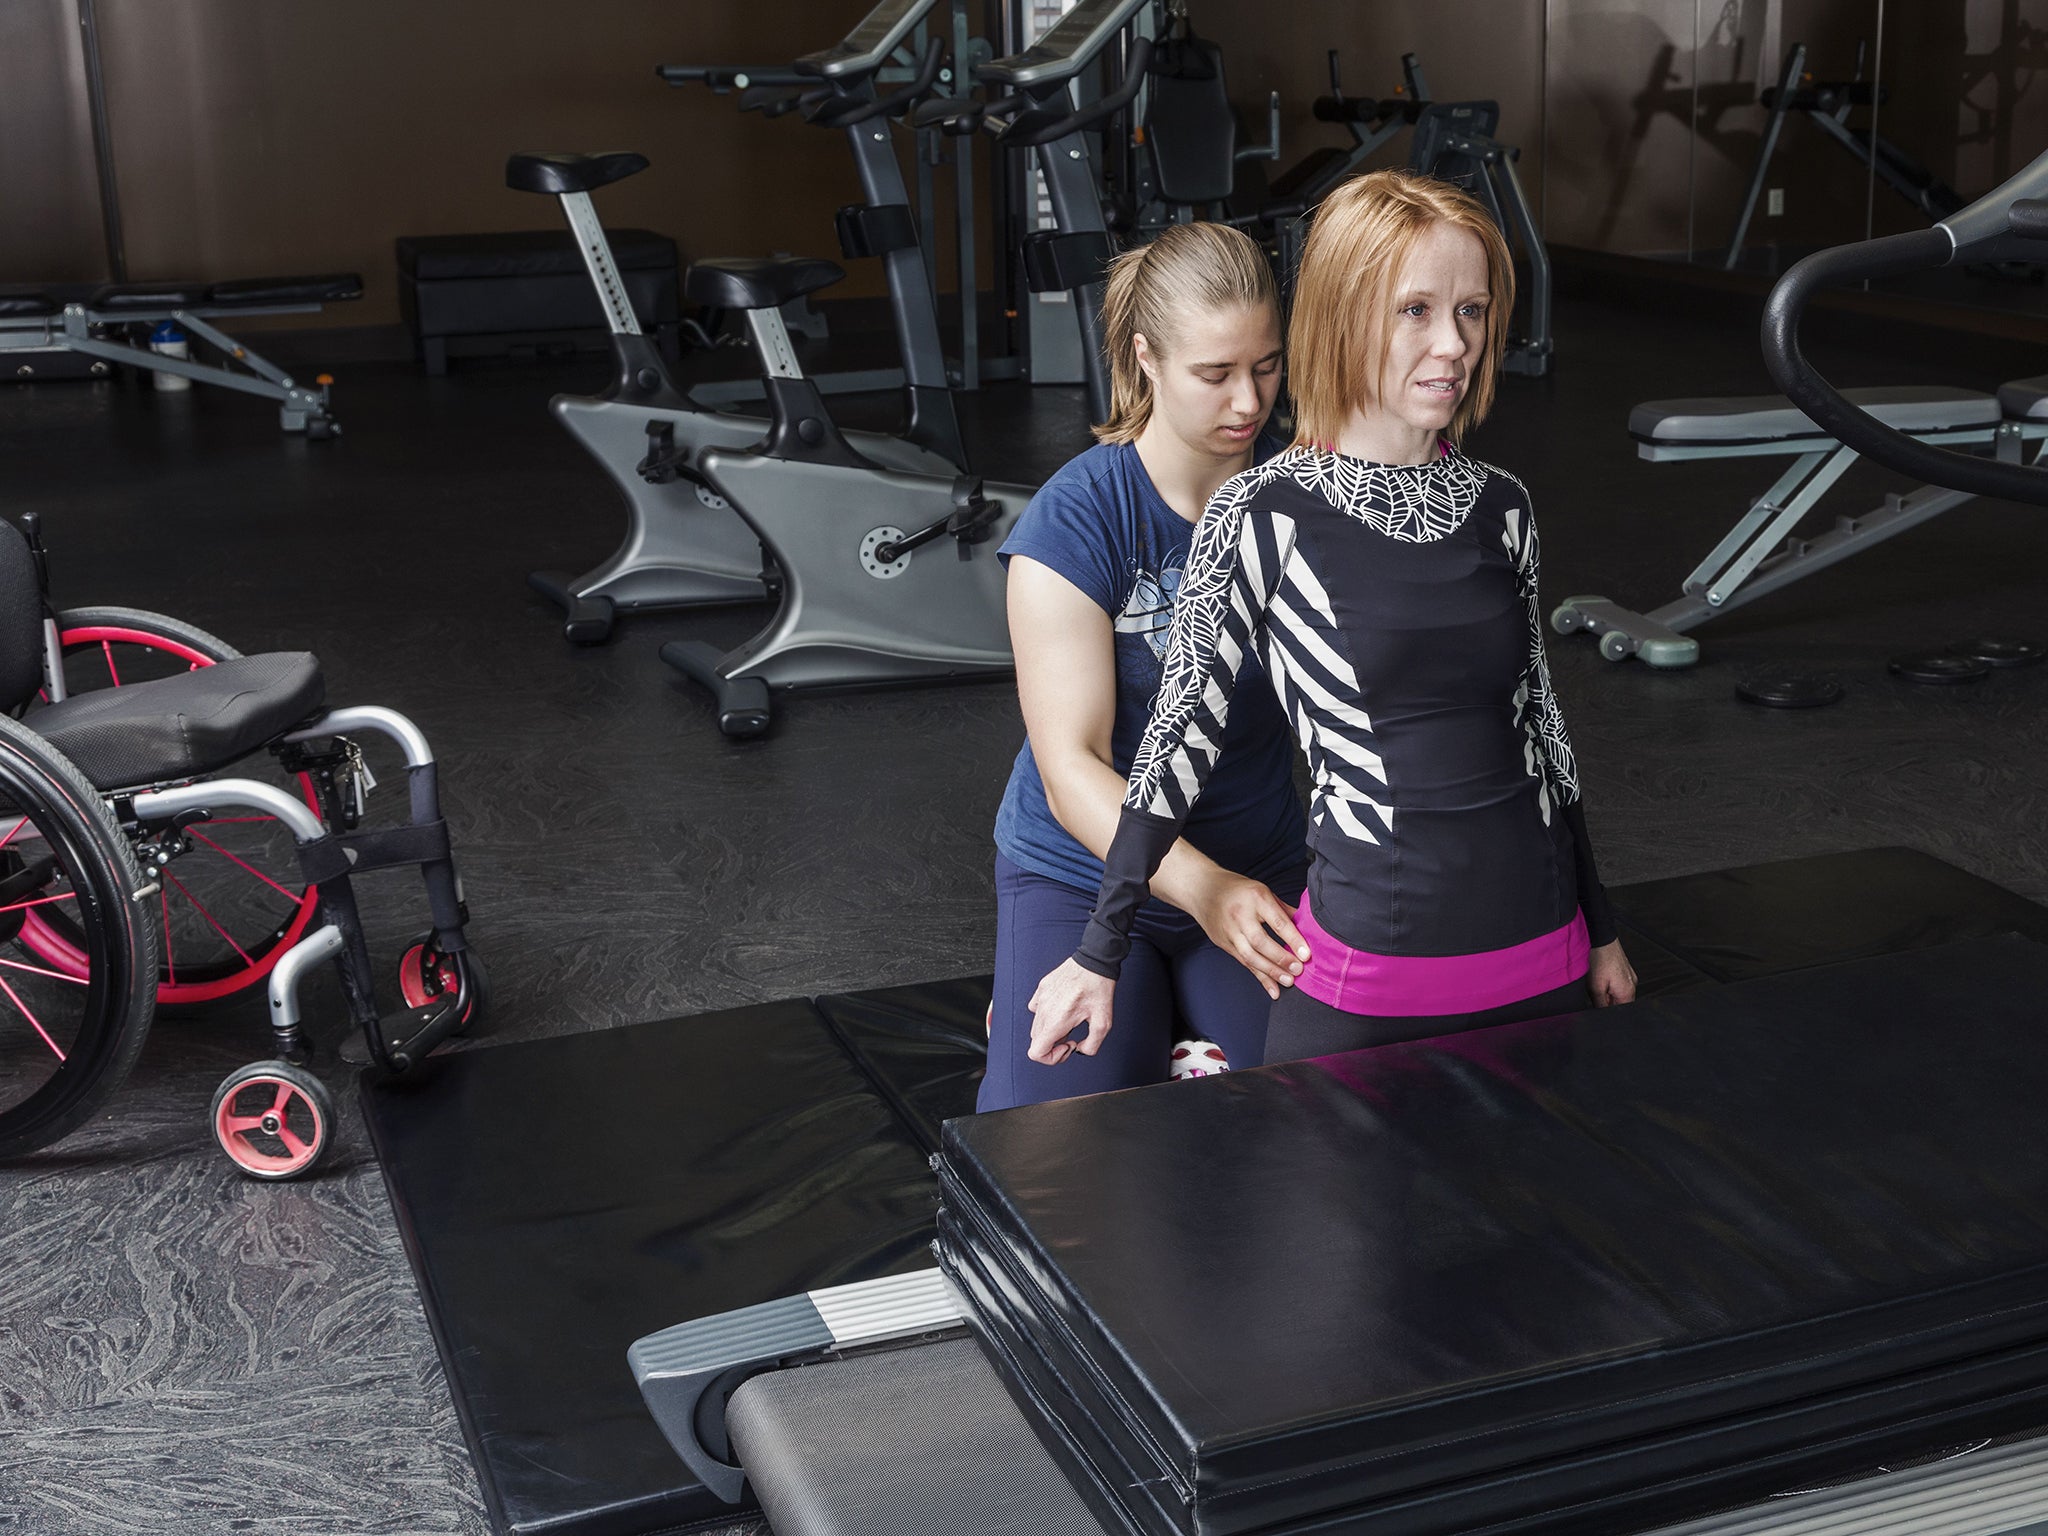 Physical therapists help patients recover from illnesses and injuries